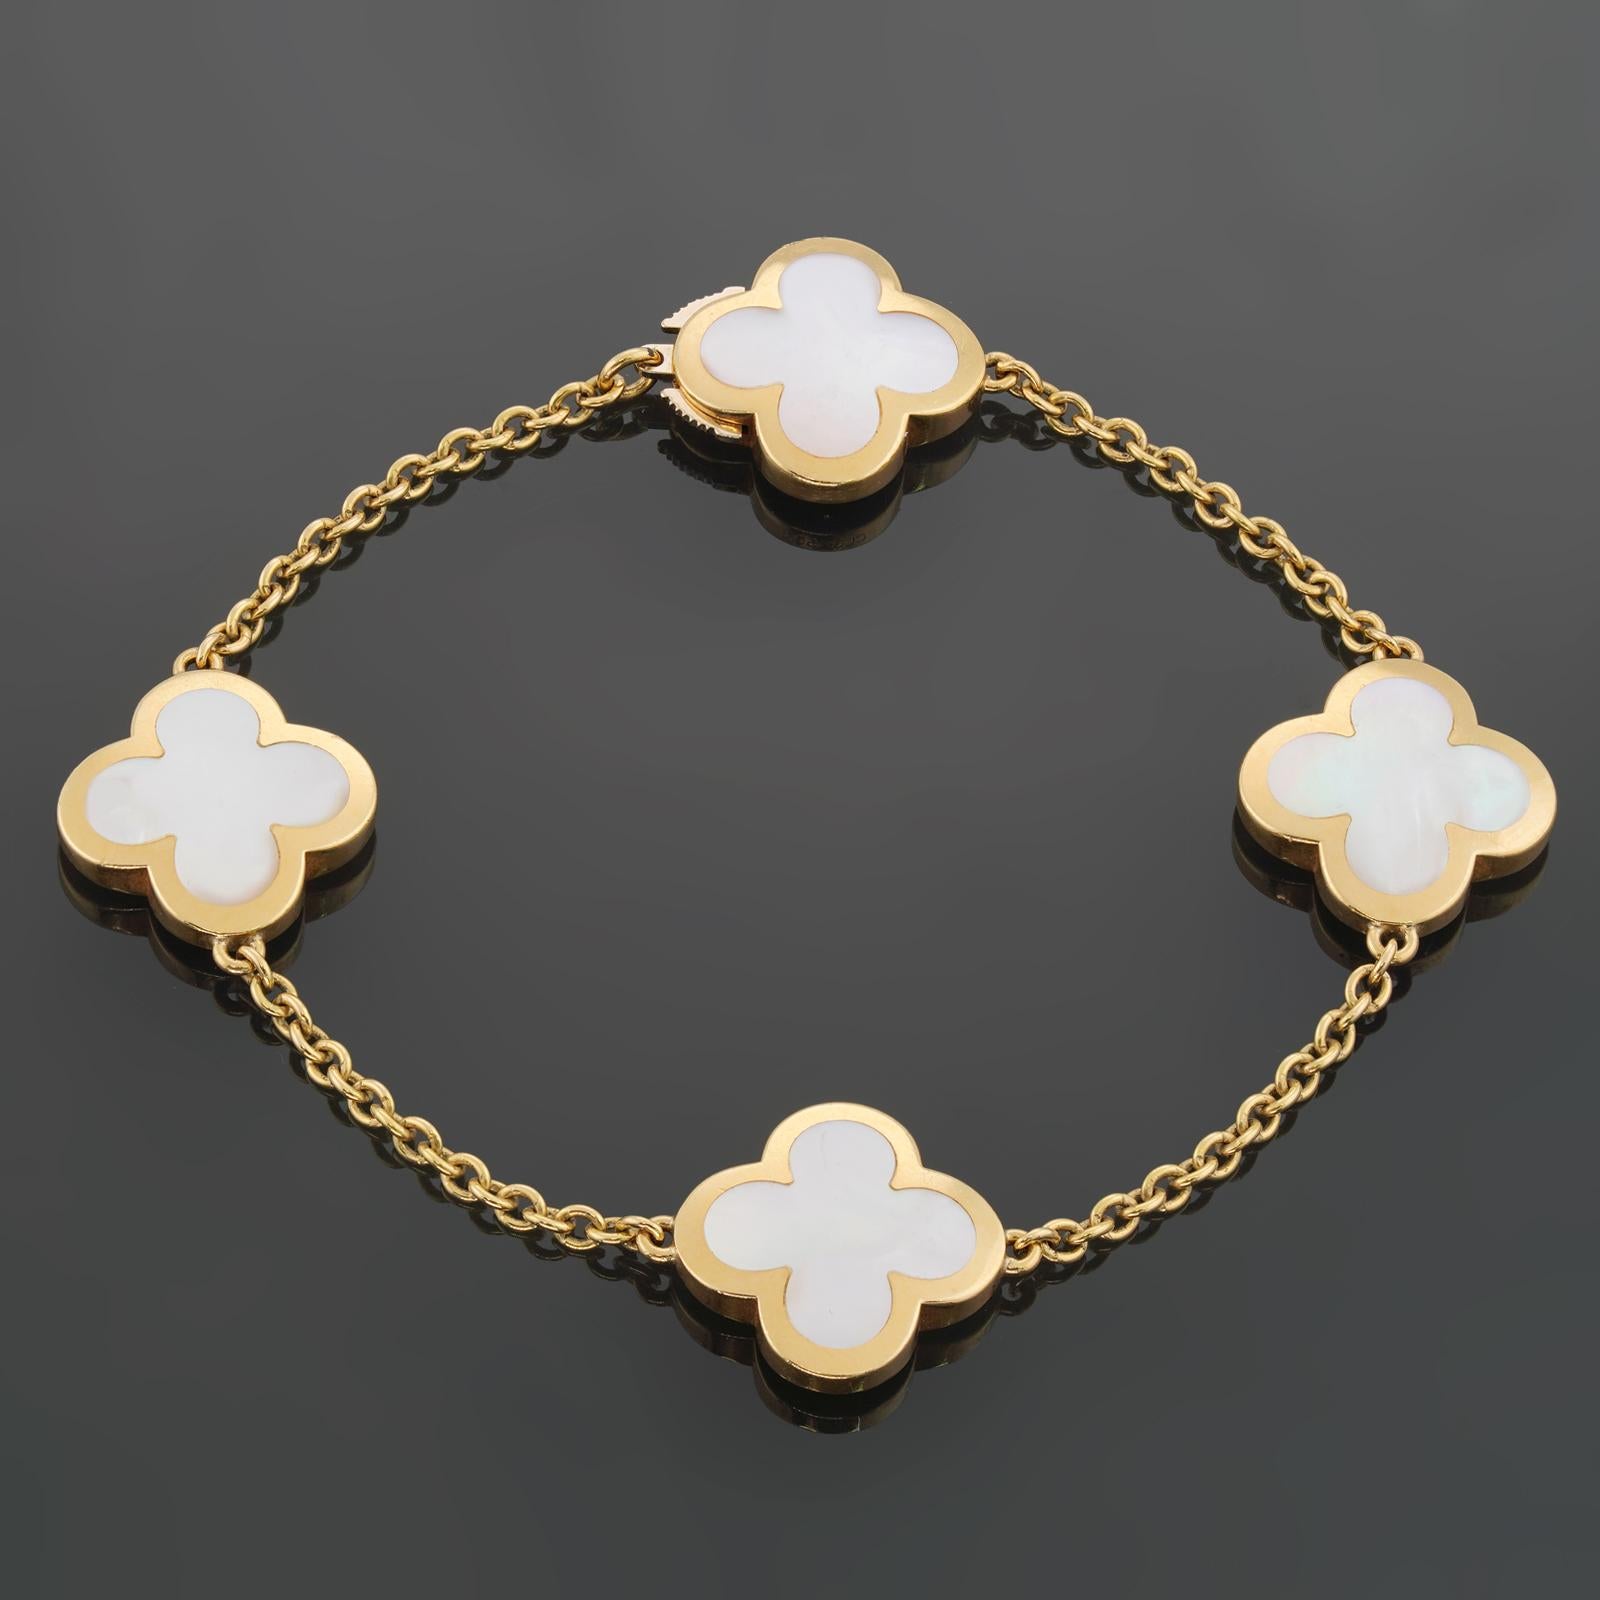 This fabulous Van Cleef & Arpels bracelet from the Pure Alhambra collection is crafted in 18k yellow gold and features 4 lucky clover motifs inlaid with mother-of-pearl. Completed with a concealed clasp. Made in France circa 2010s. Measurements: